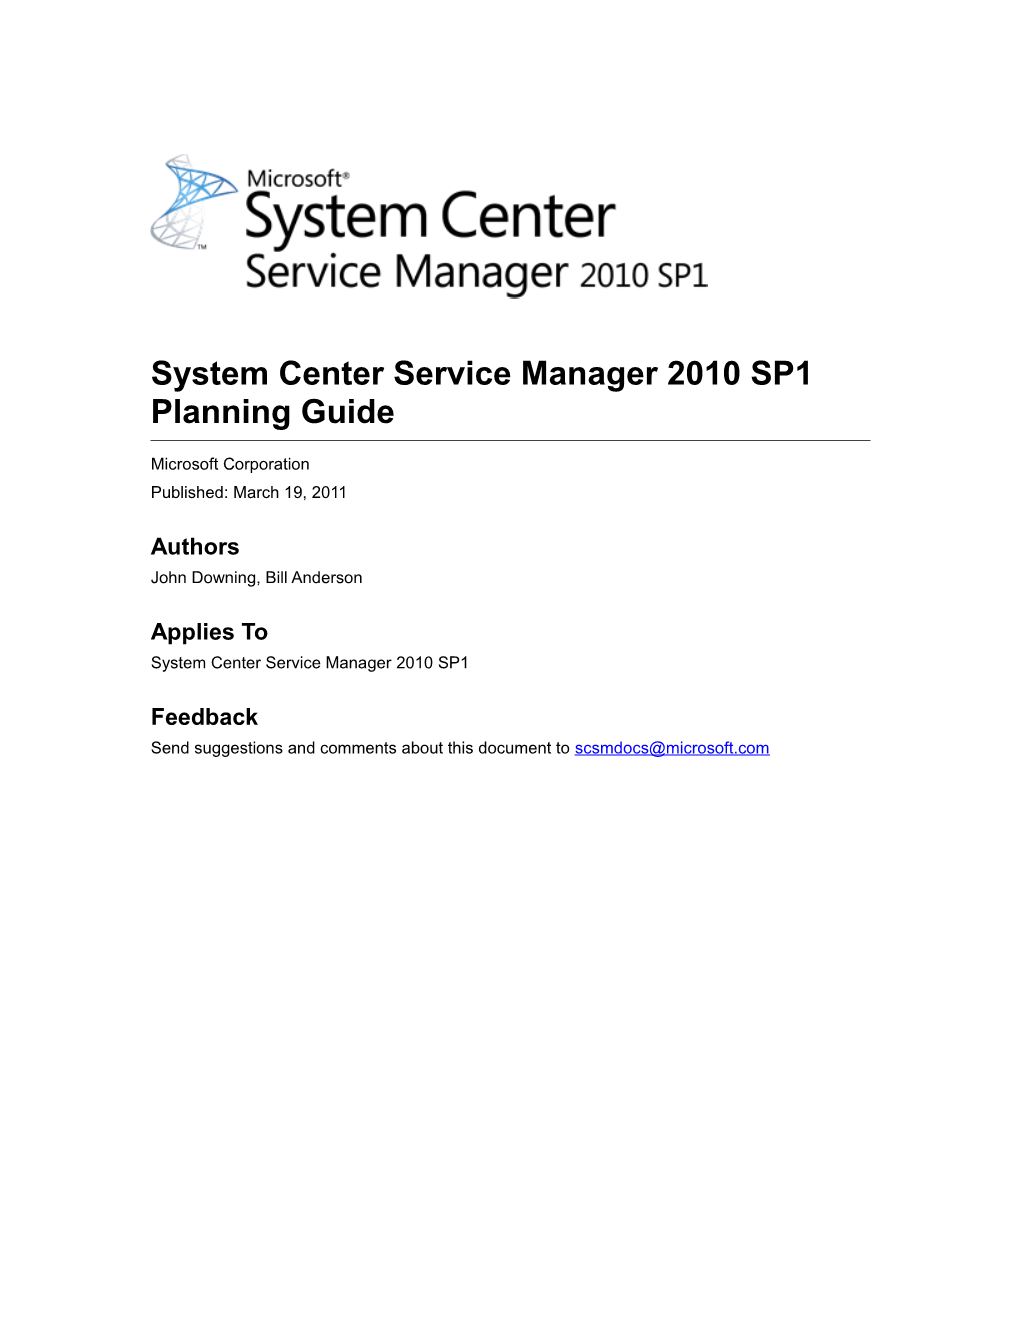 System Center Service Manager 2010 SP1 Planning Guide